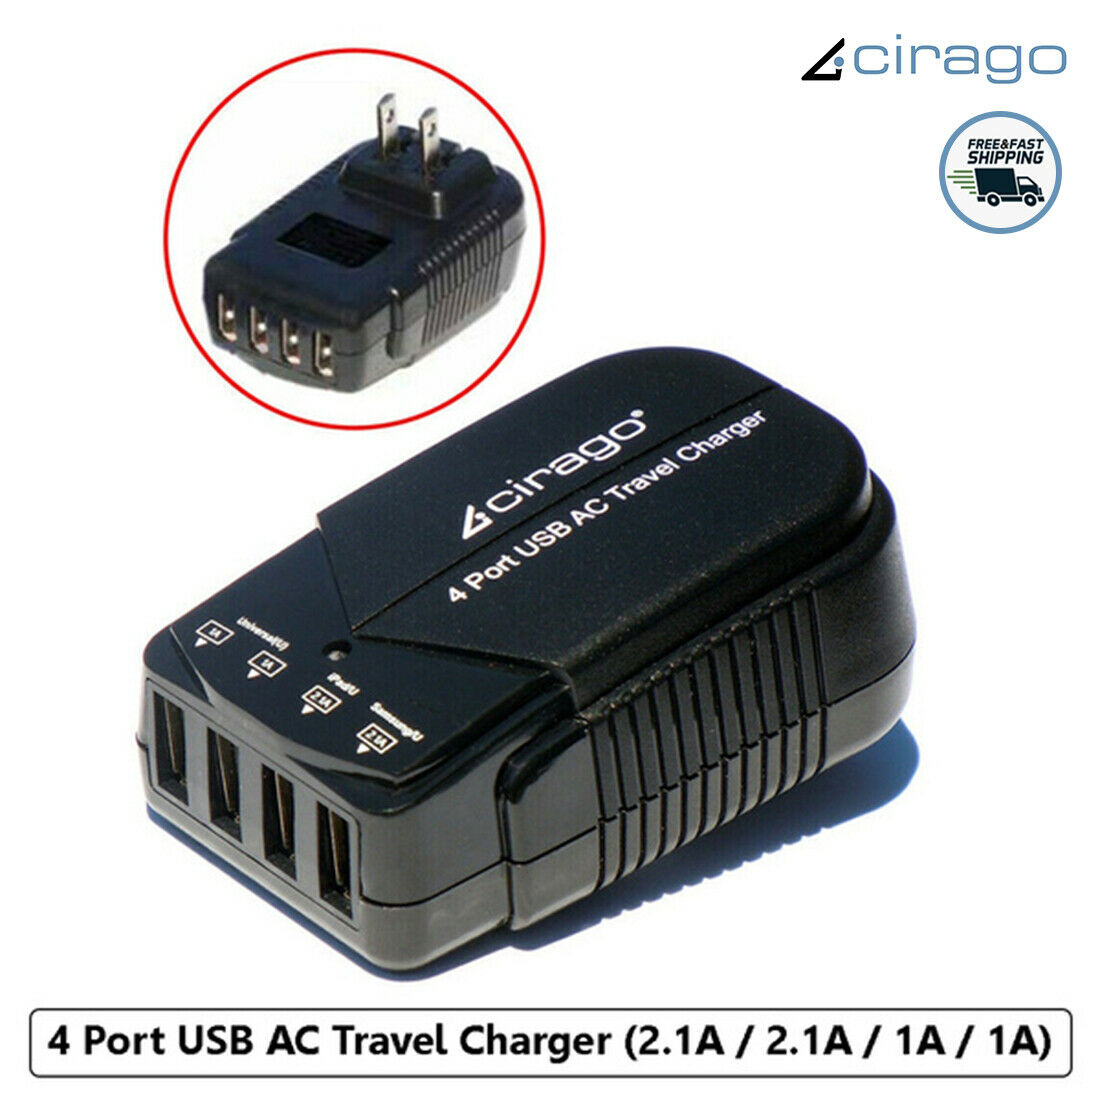 Cirago 4 USB Ports Portable Wall Charger Home & Travel Size 5V AC Adapter, Black